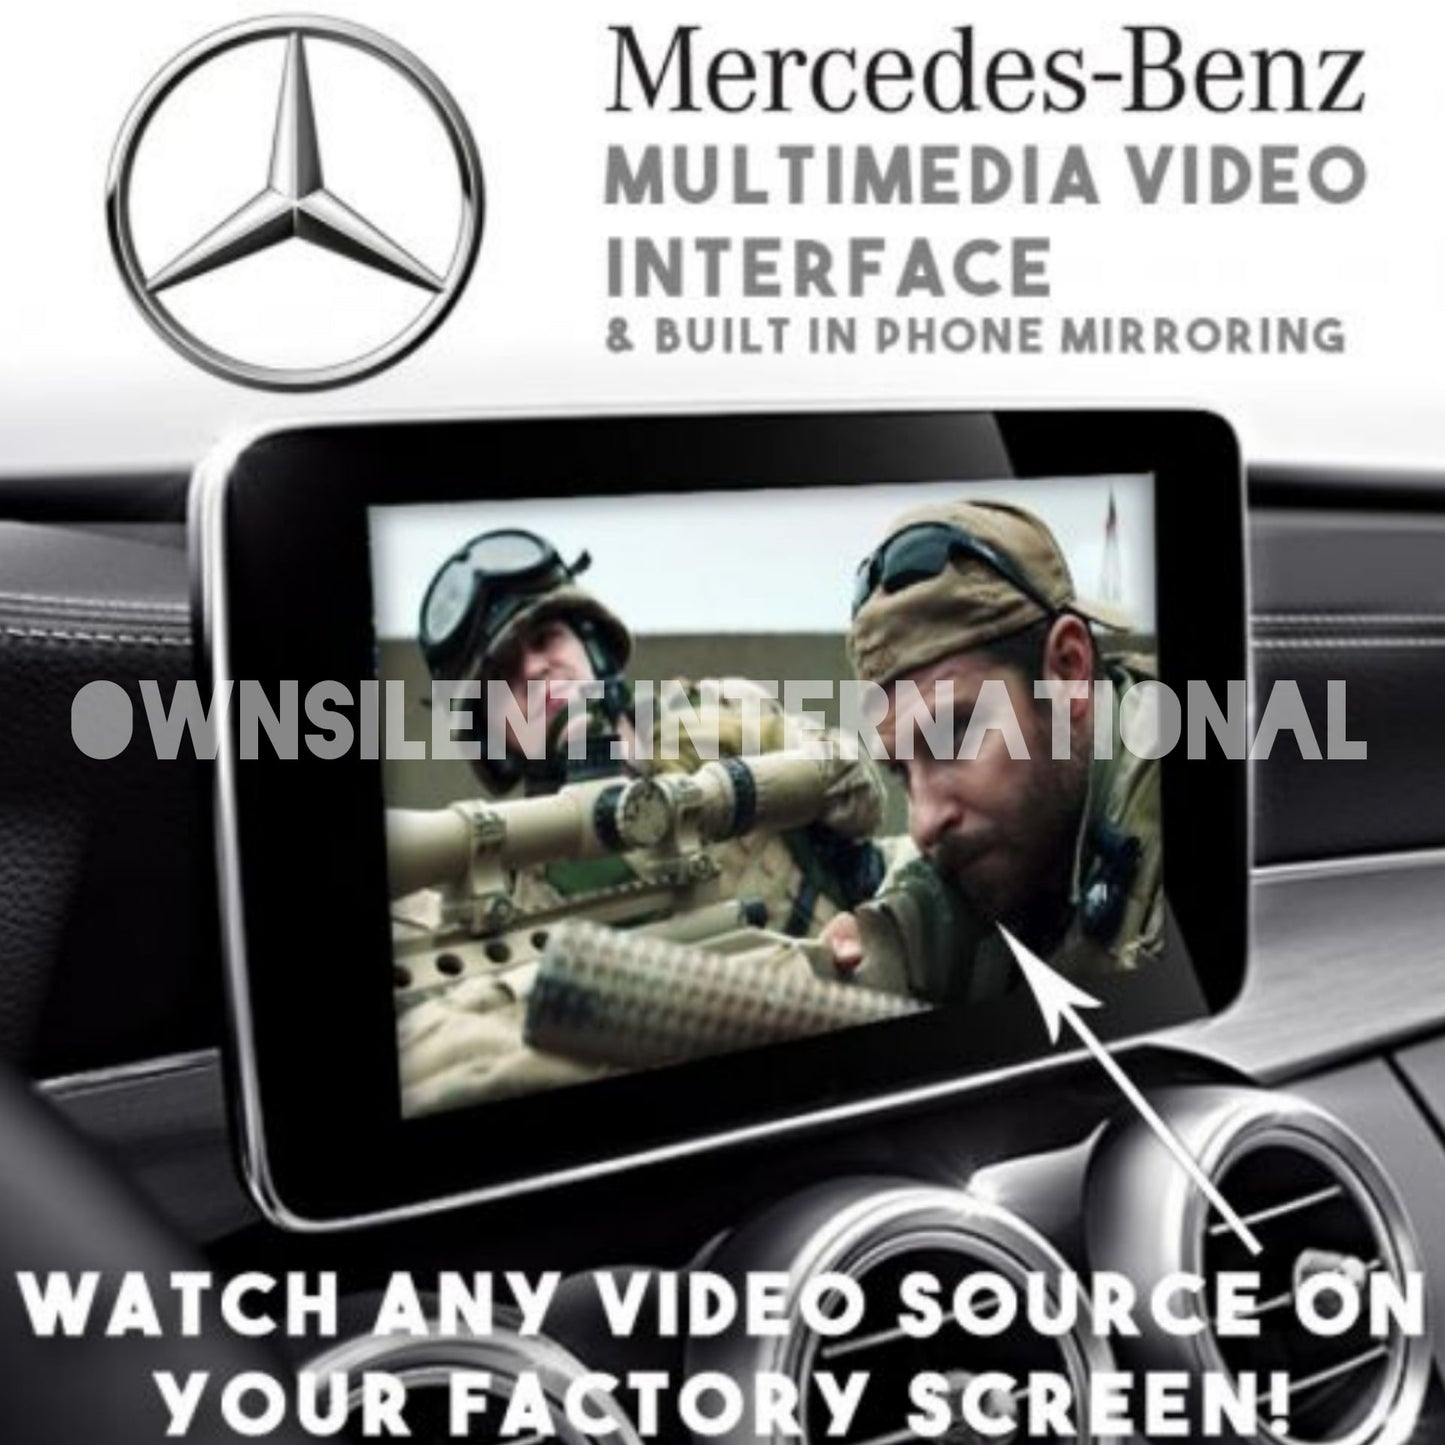 Mercedes NTG5 Multimedia Car Video & Camera Interface With HDMI Phone Mirroring